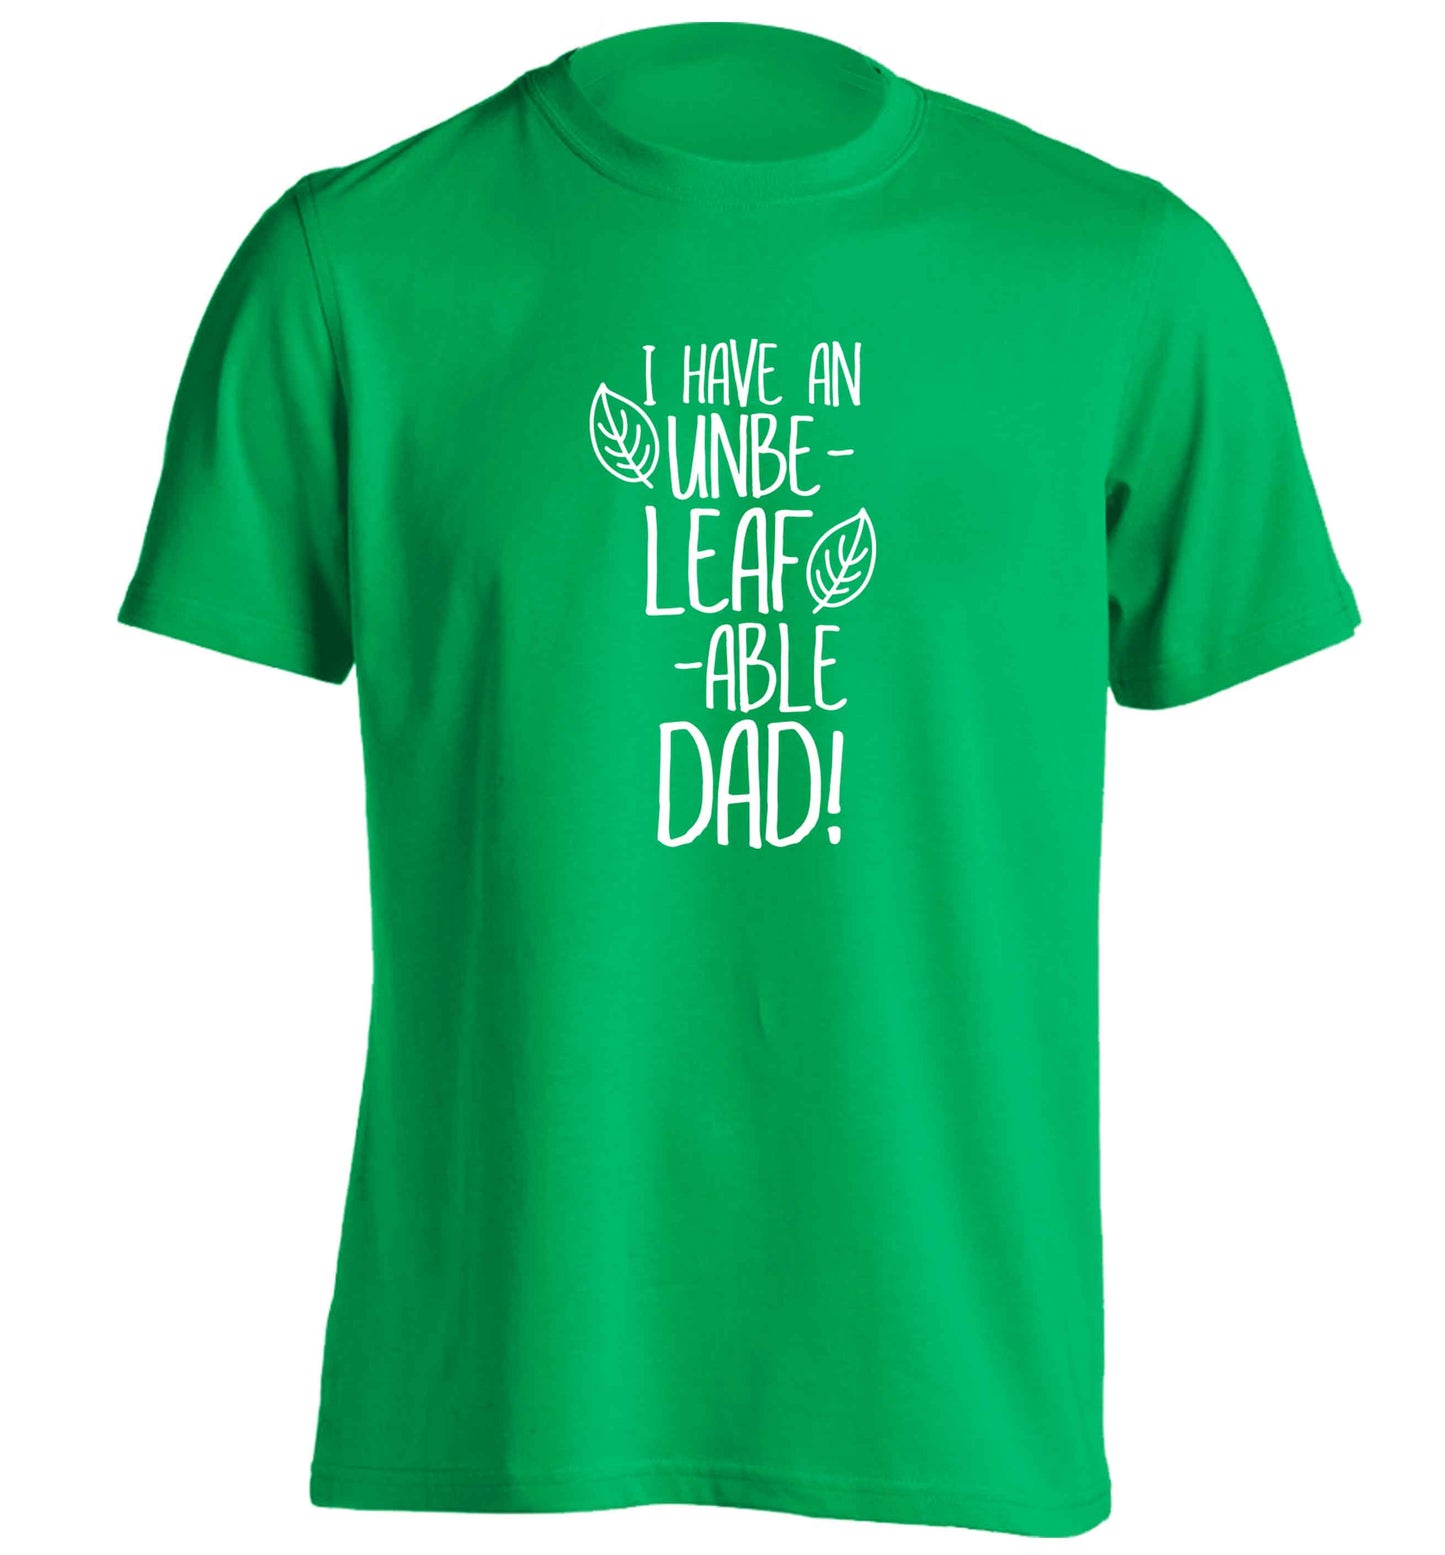 I have an unbe-leaf-able dad adults unisex green Tshirt 2XL